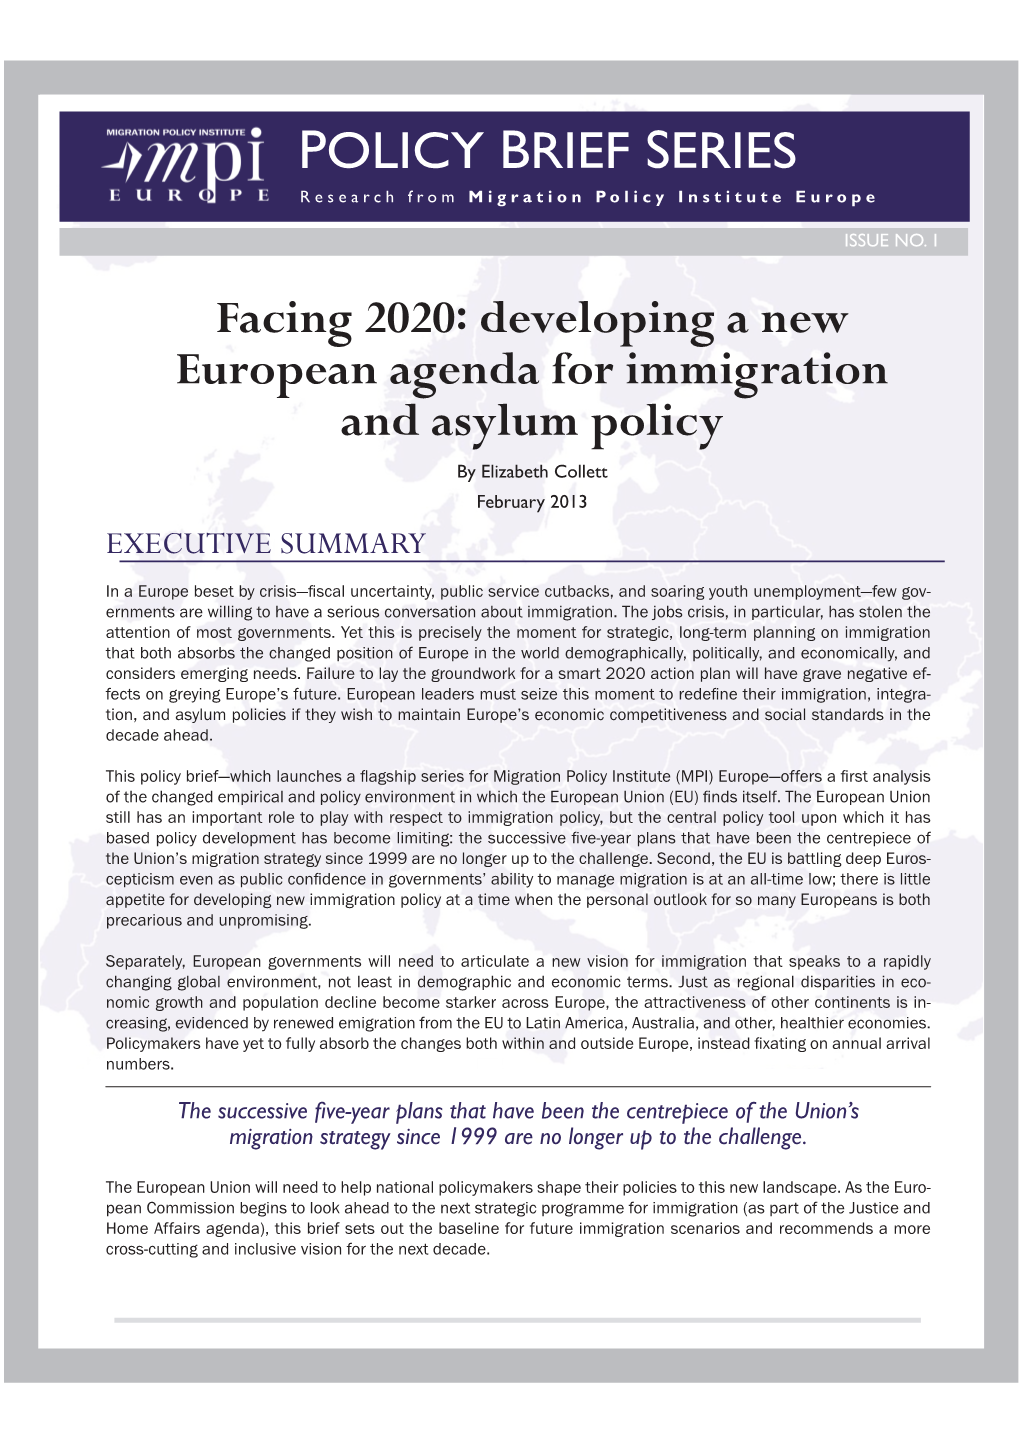 Facing 2020: Developing a New European Agenda for Immigration and Asylum Policy by Elizabeth Collett February 2013 EXECUTIVE SUMMARY